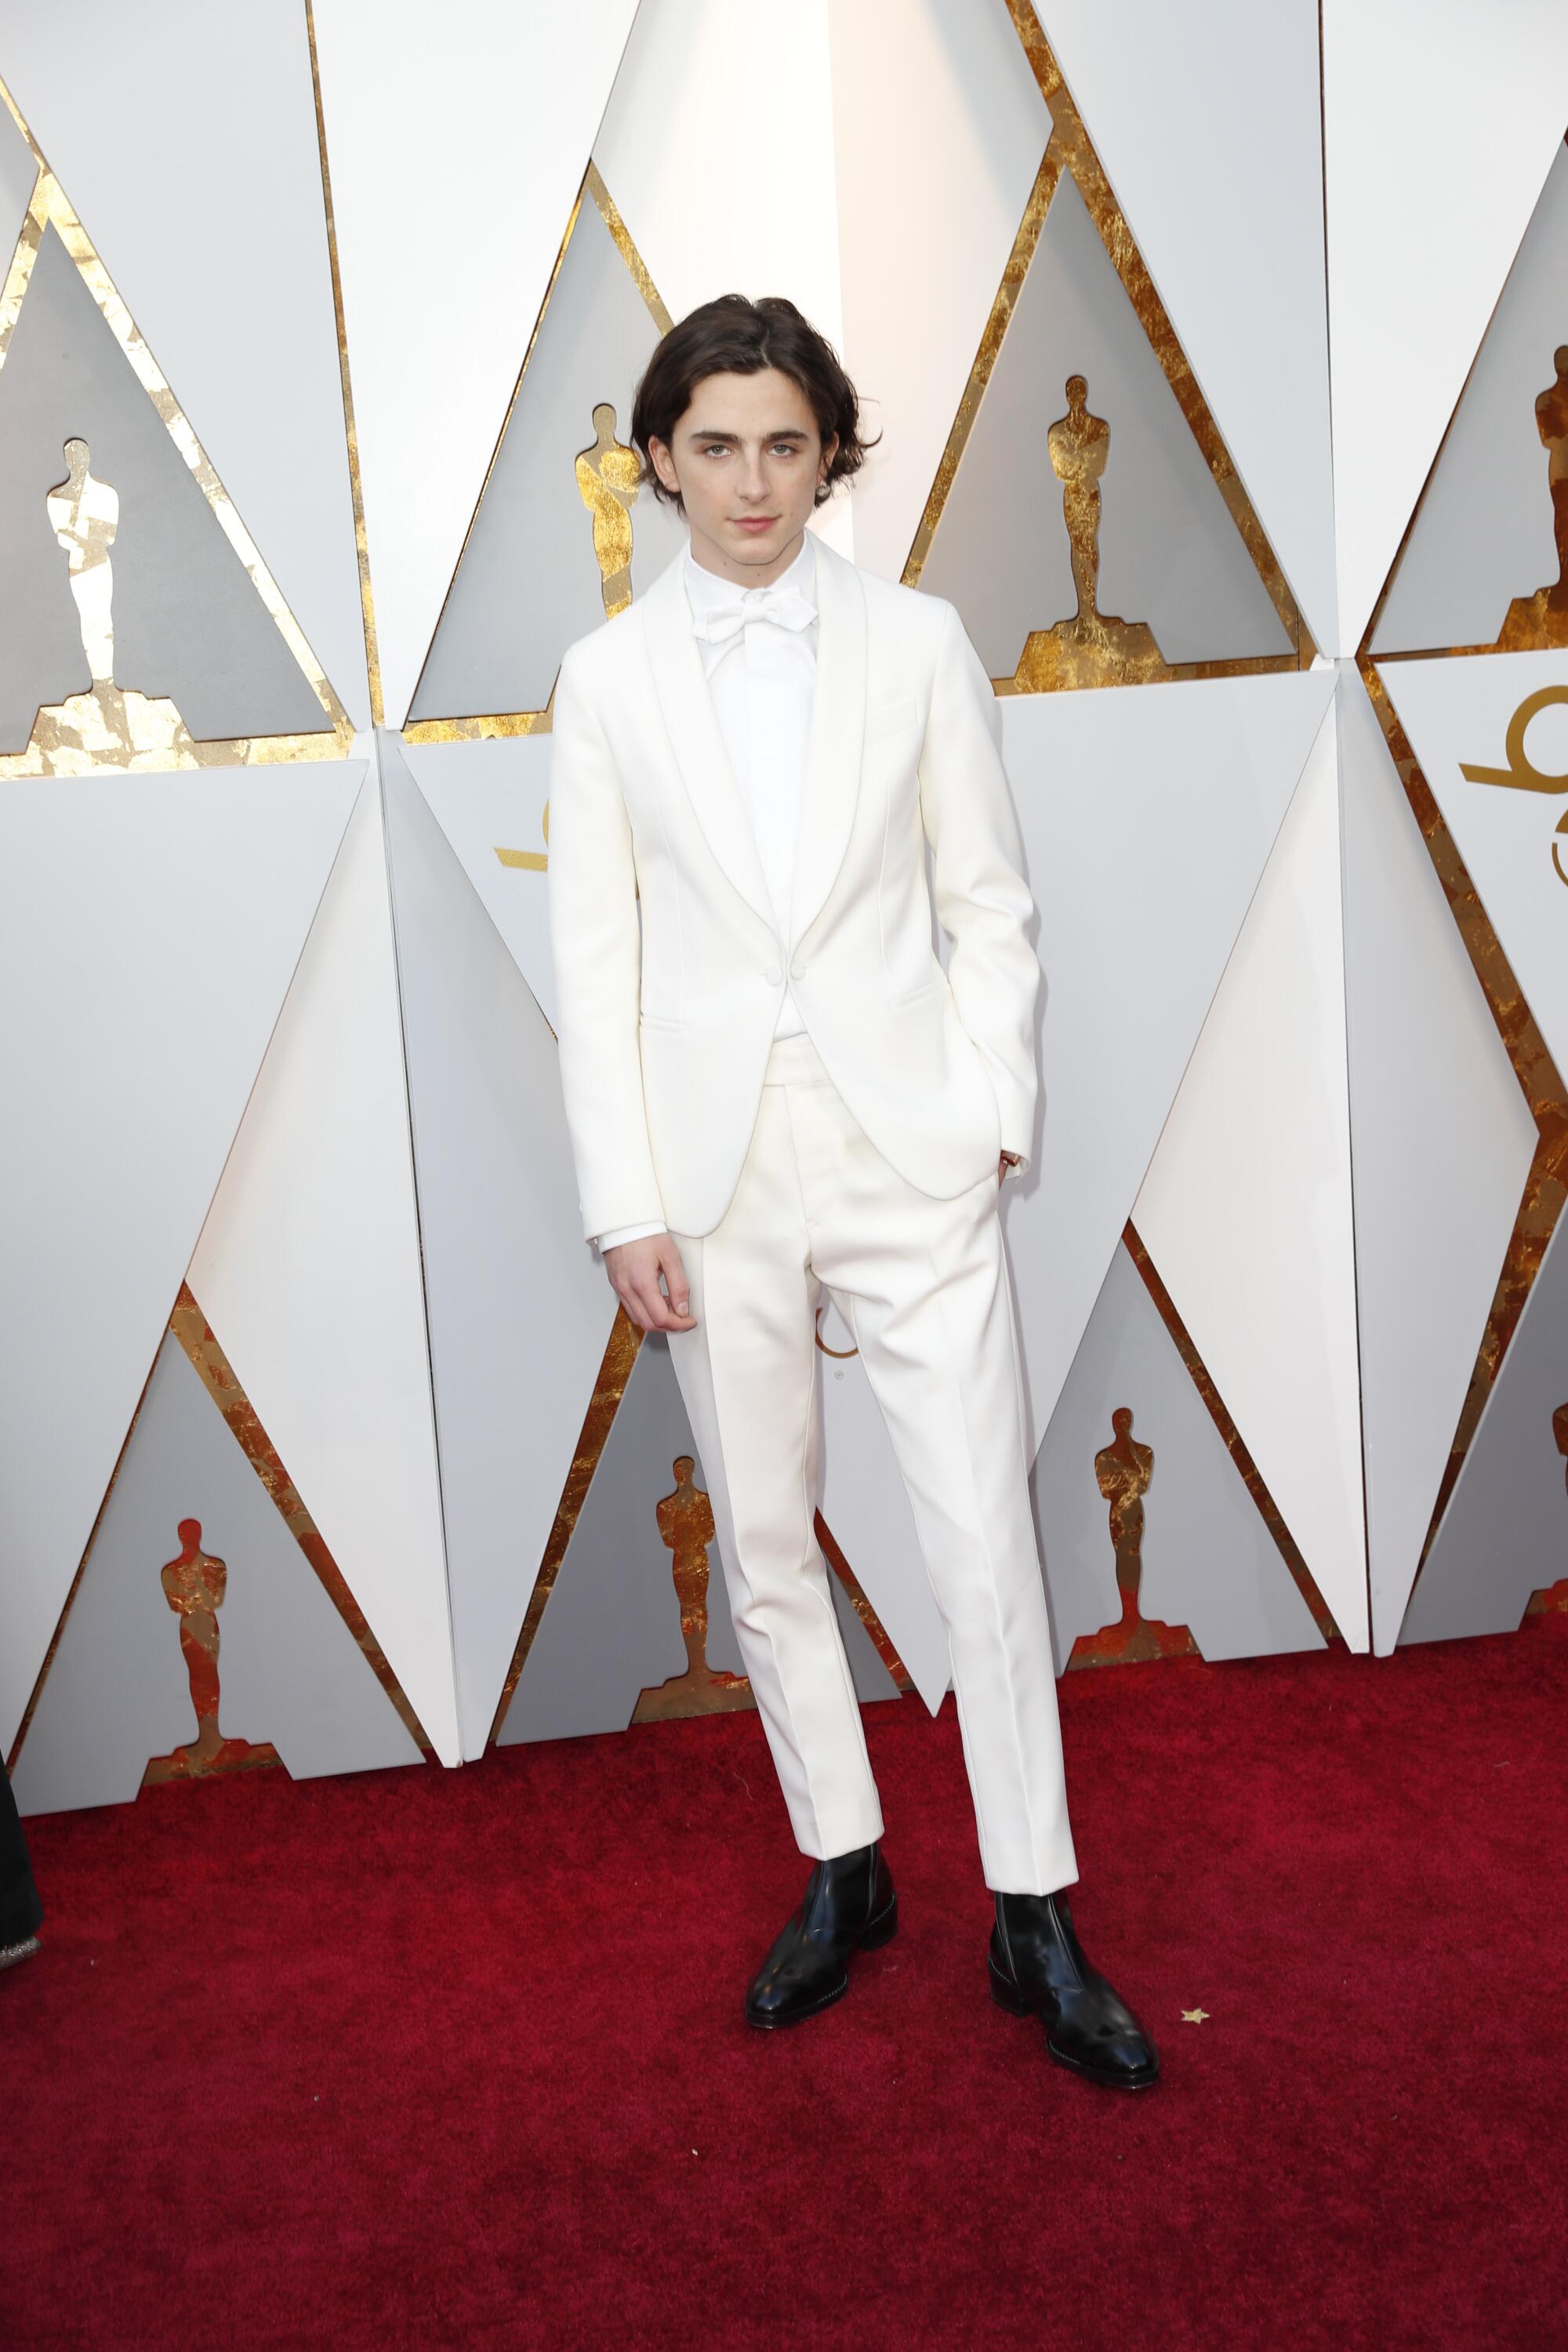 Timothée Chalamet on the red carpet at the 90th Academy Awards.